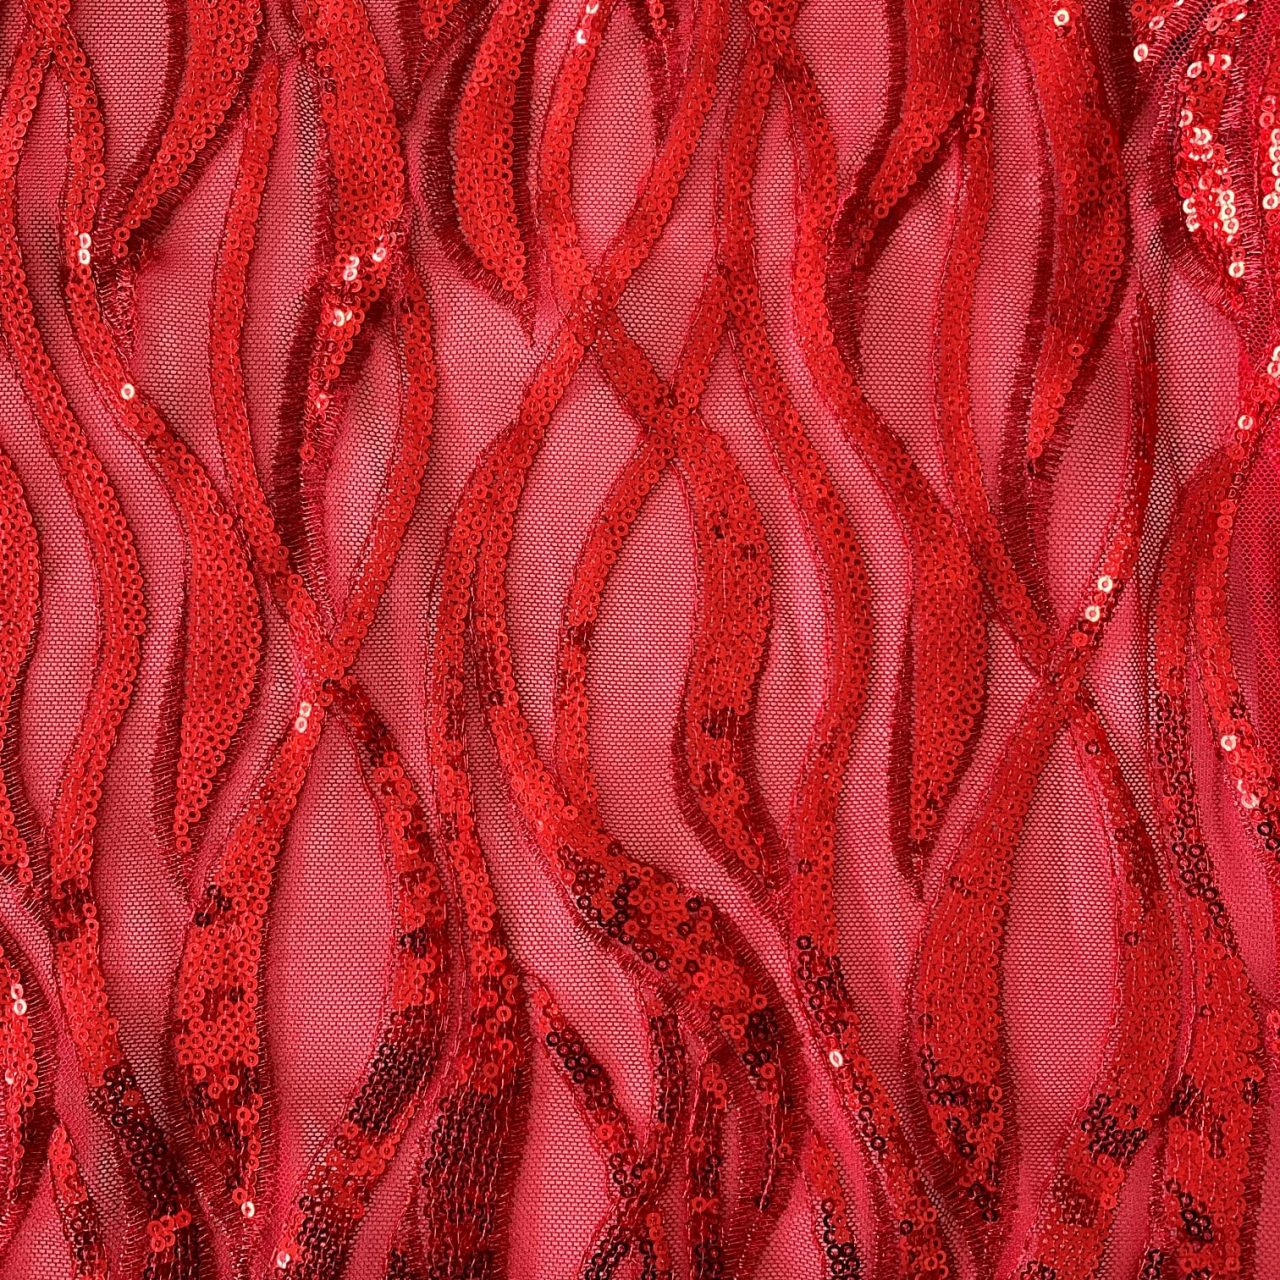 Red Sequin Fabric, 5mm Full Sequins on Mesh Fabric, Red Sequins Sewed on  Fabric for Party, Red Sequin Dress, Christmas Decor by the Yard -   Canada